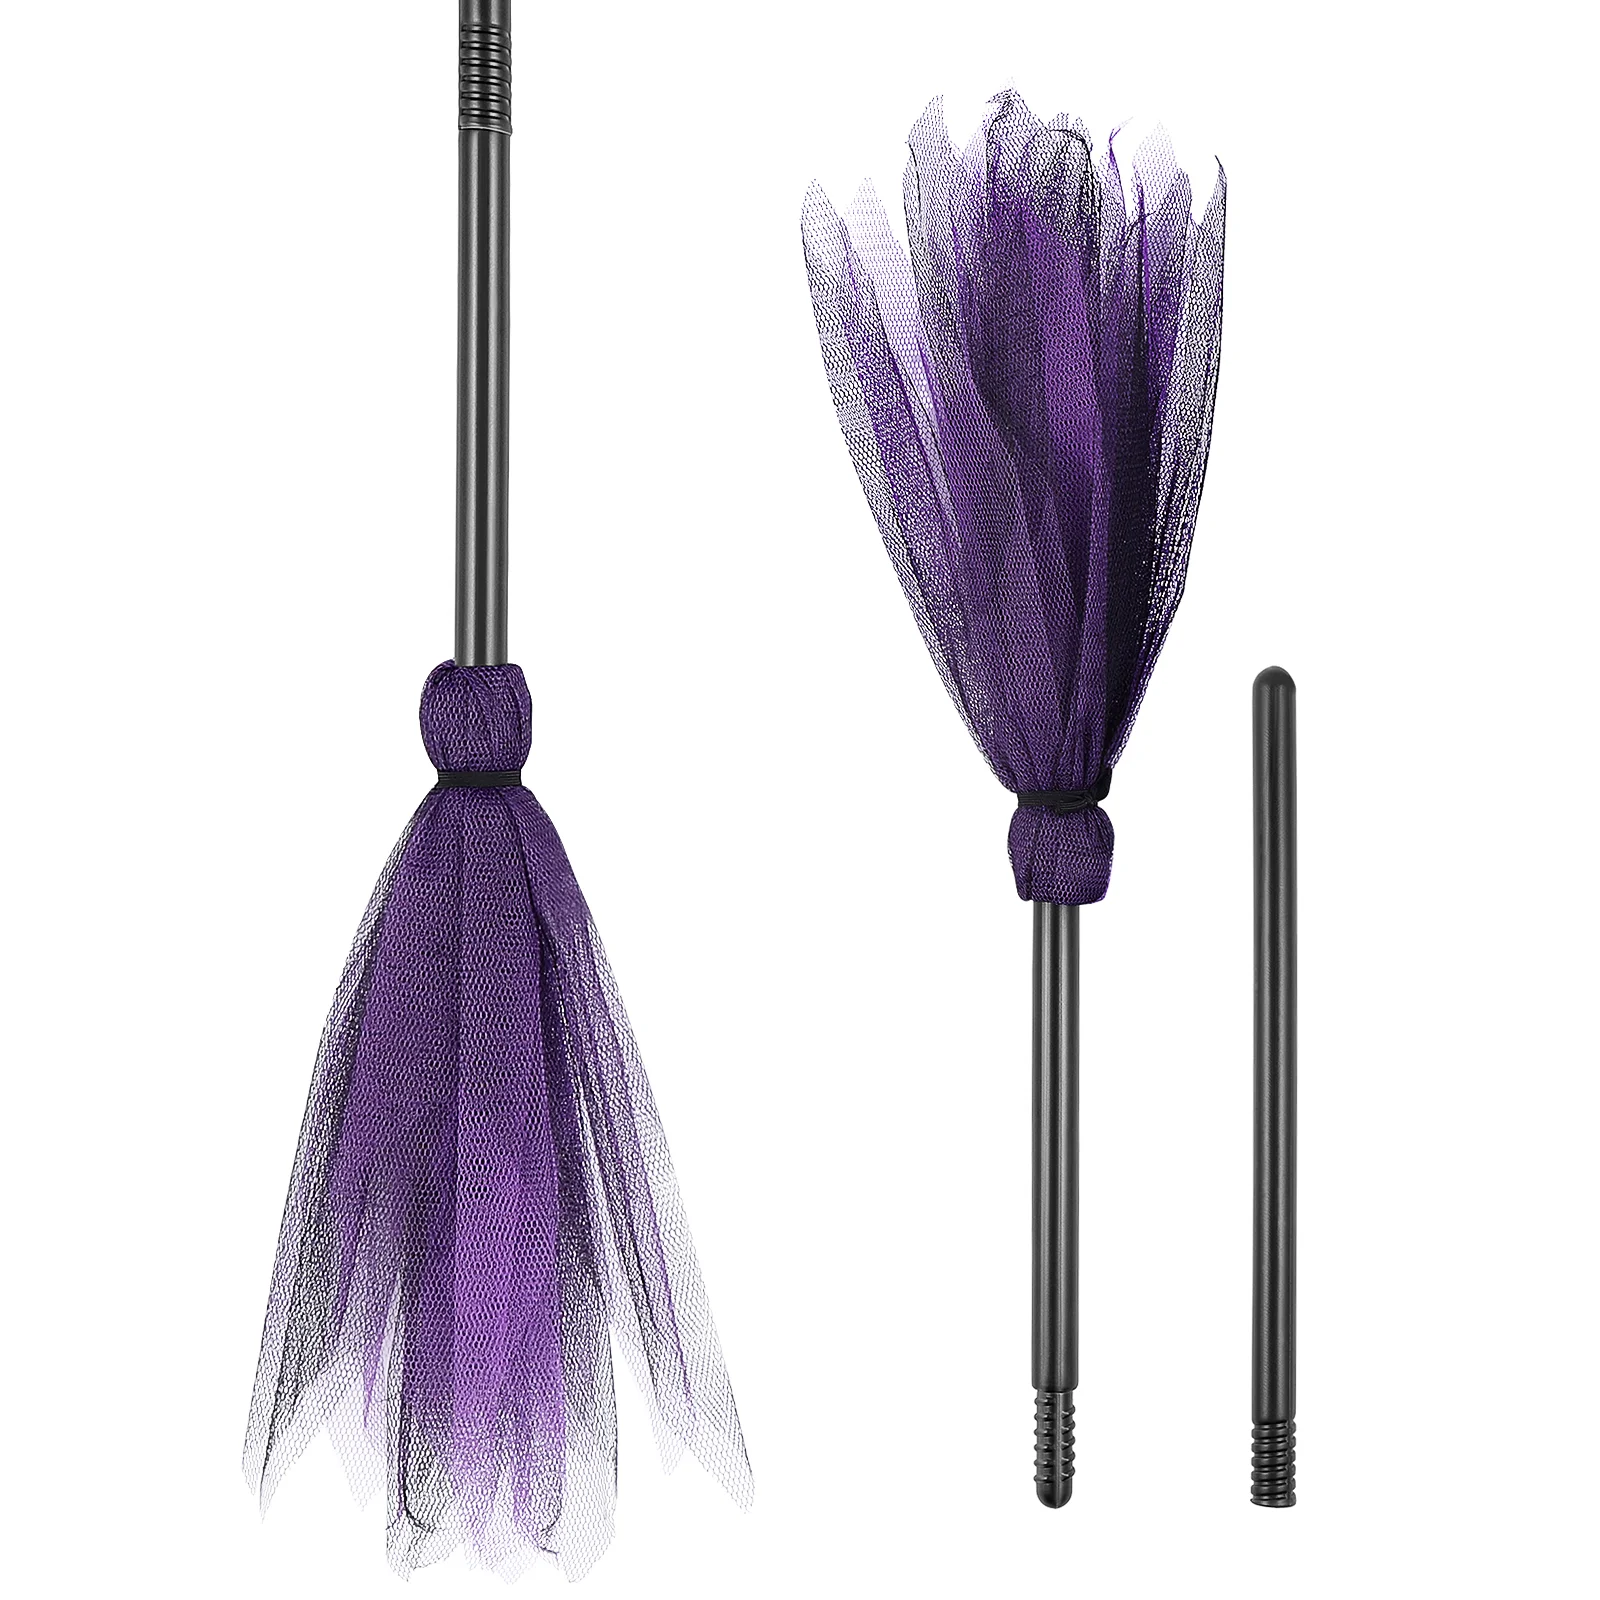 

IMIKEYA 2pcs Halloween Witches Broom Costume Decorative Props Masquerade Show Dress Up Miracle Broom Witch Broom for Feastival